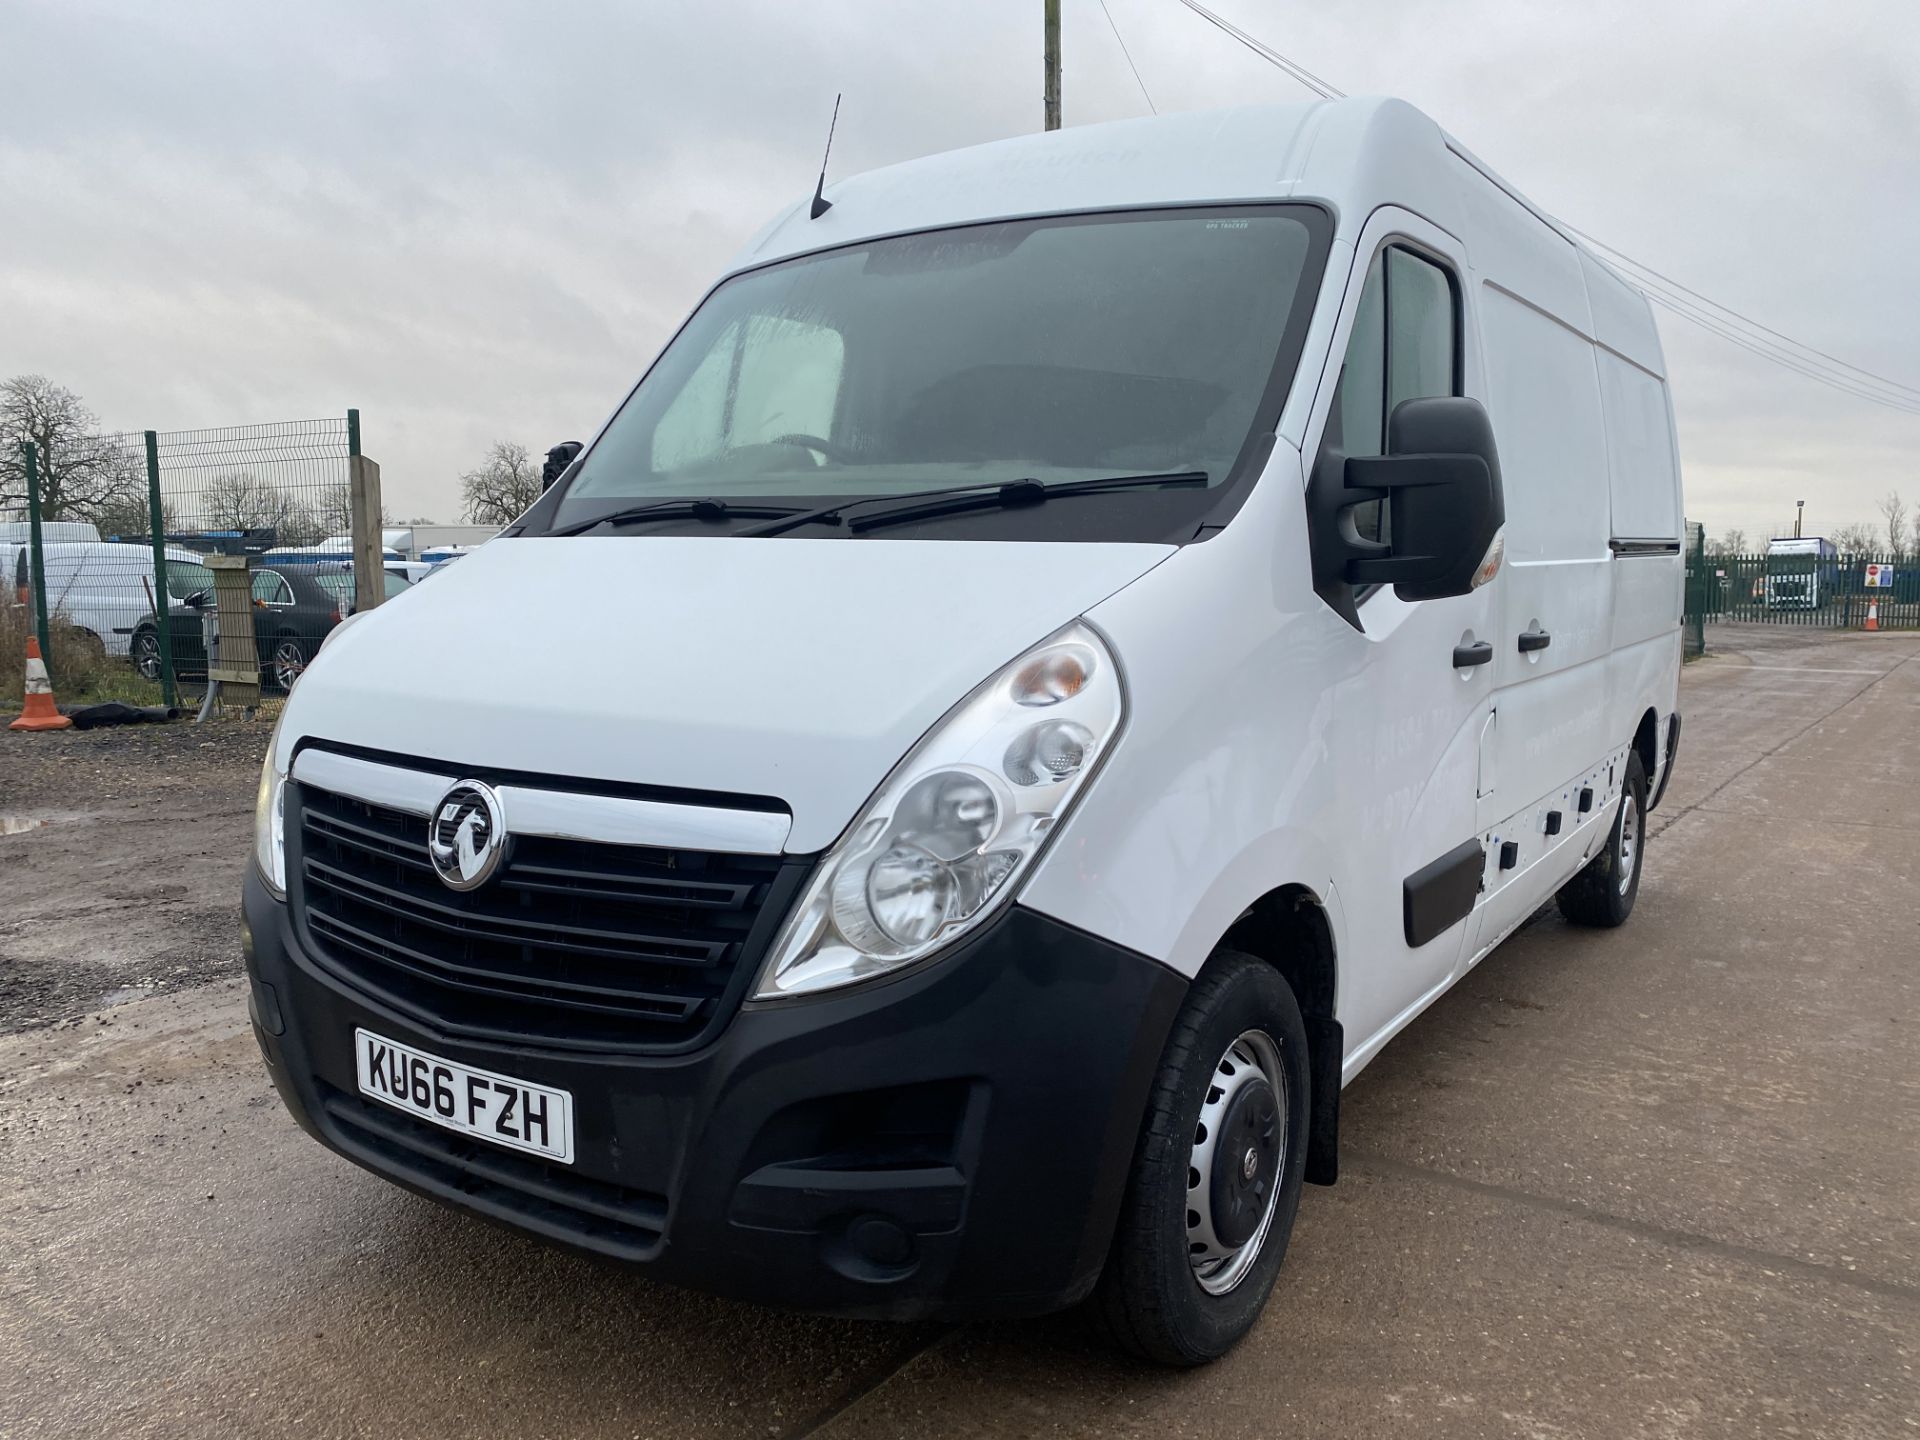 (ON SALE) RENAULT MASTER / VAUXHALL MOVANO 2.3CDTI (130) EURO 6 - 66 REG - ONLY 99K MILES - AIR CON - Image 3 of 12